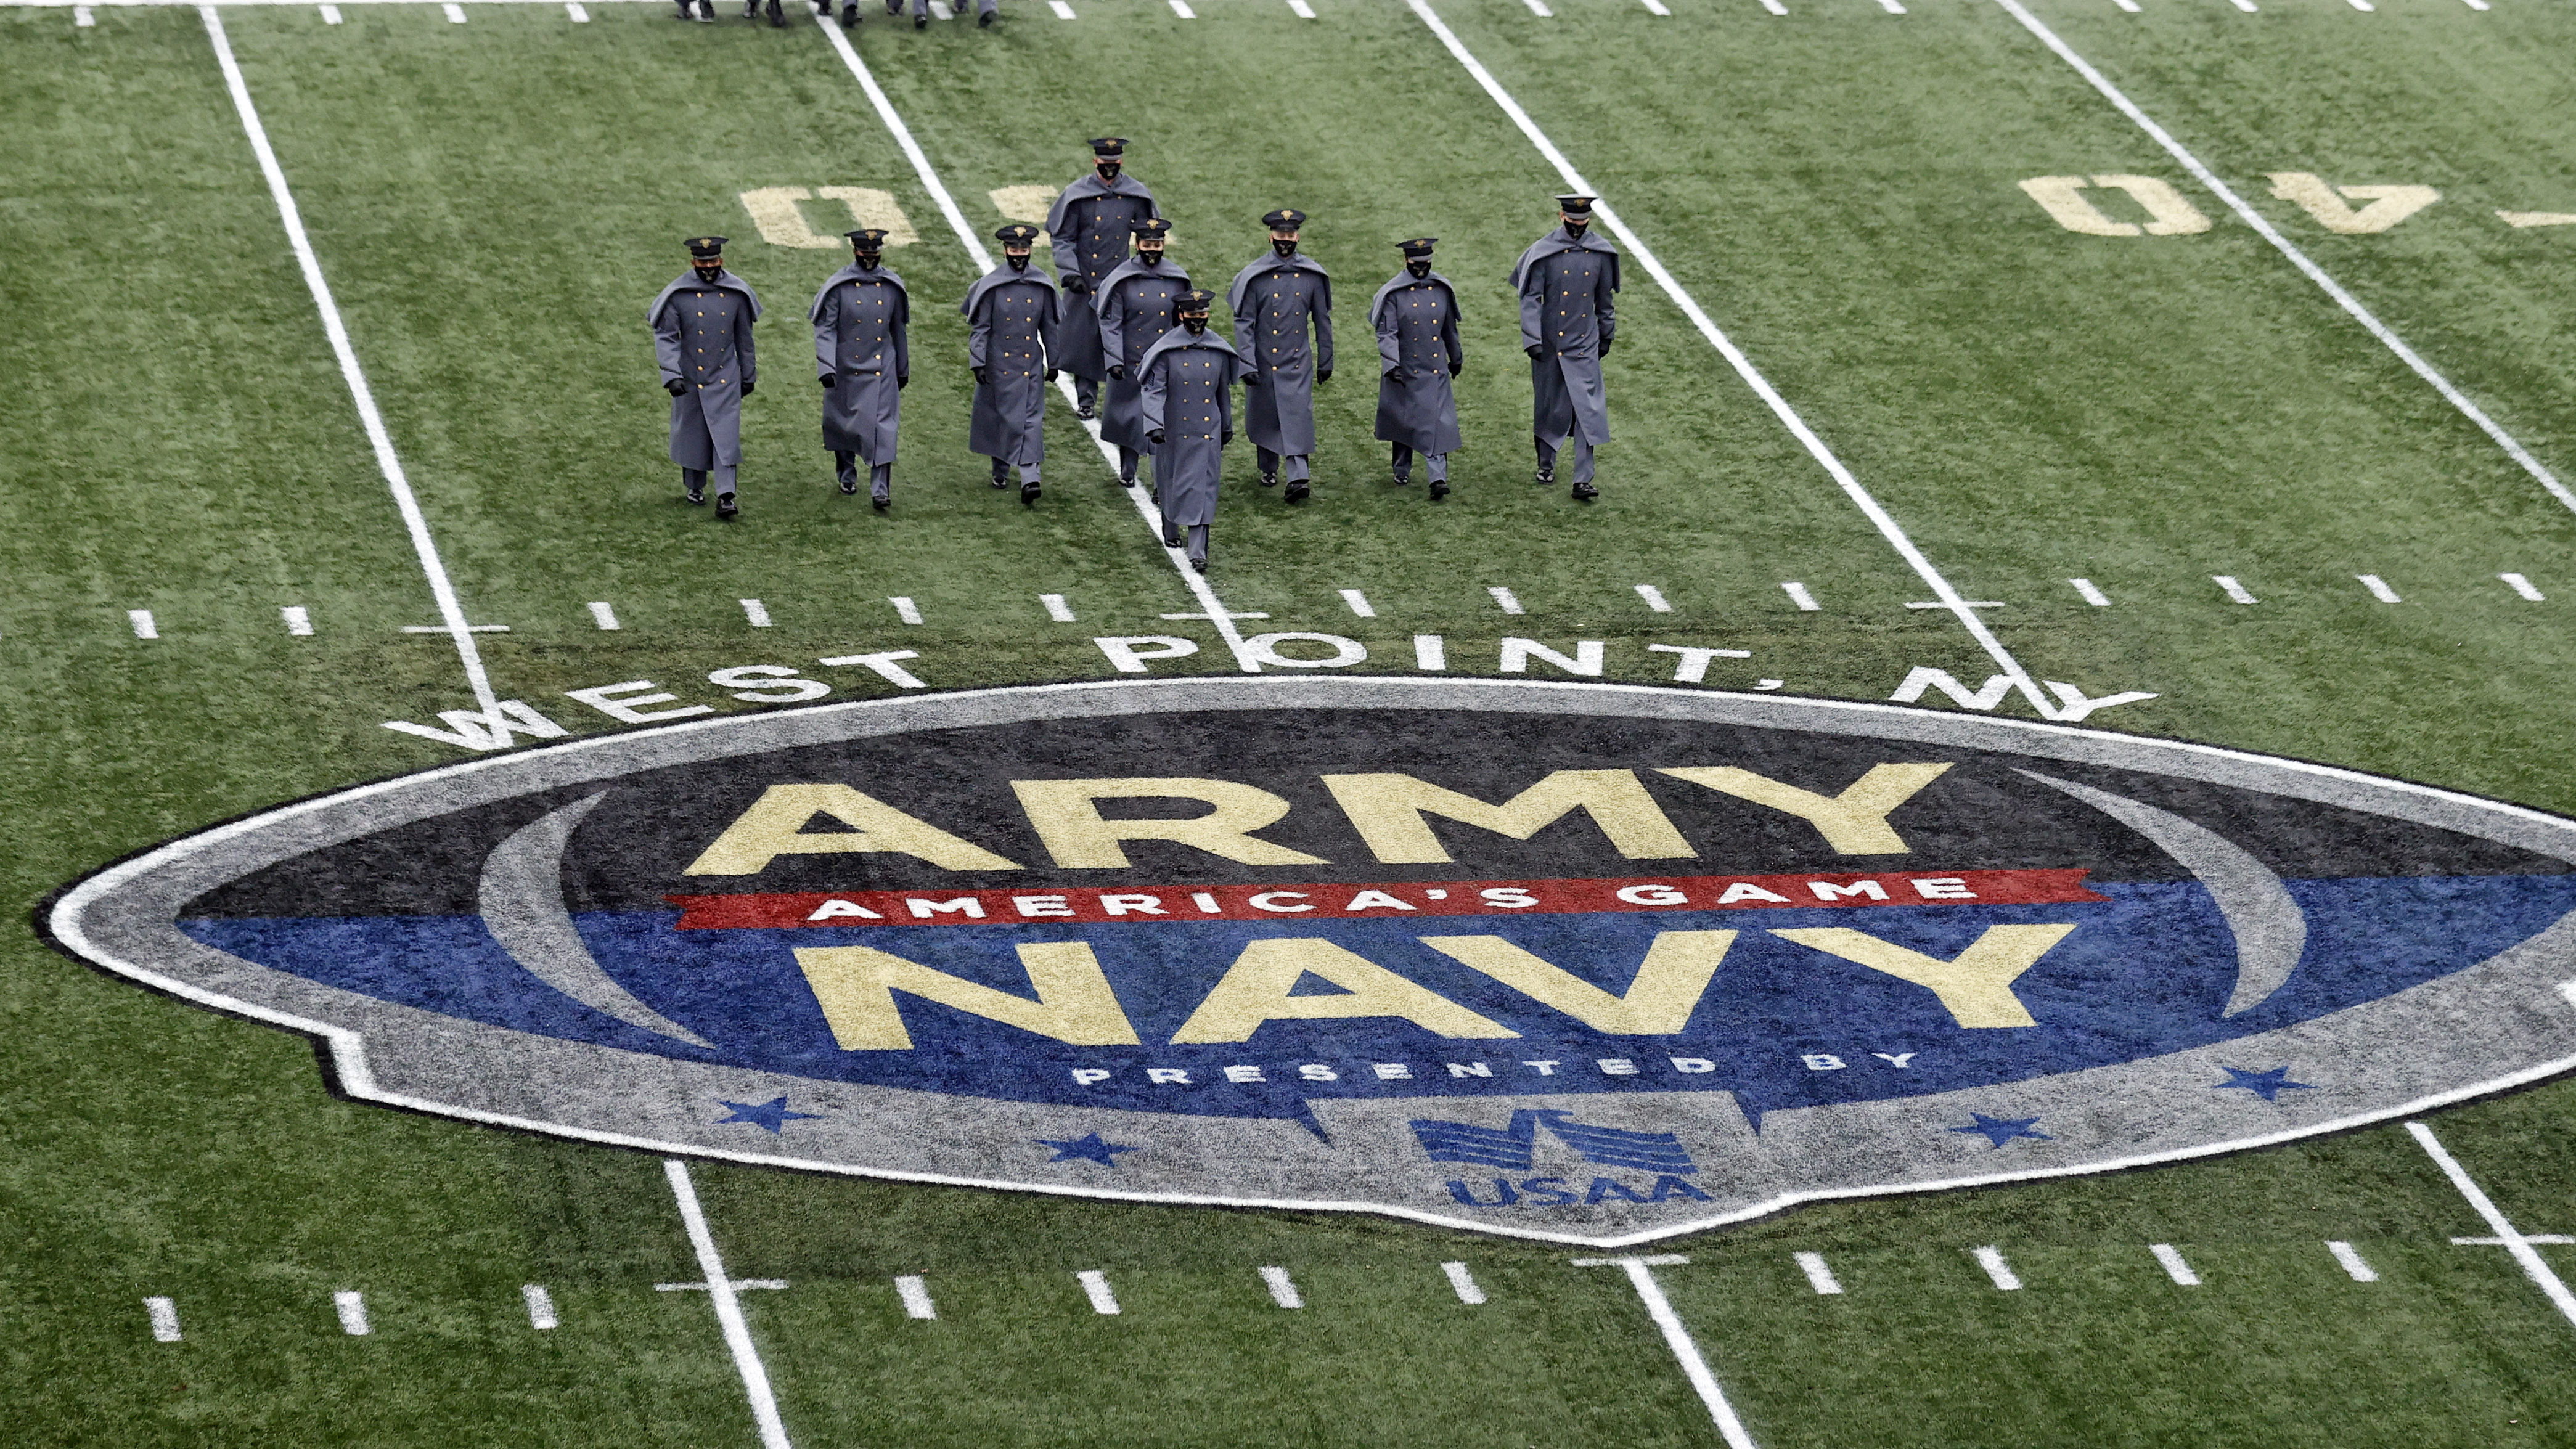 Army-Navy Game presented by USAA - Exchange Community Hub